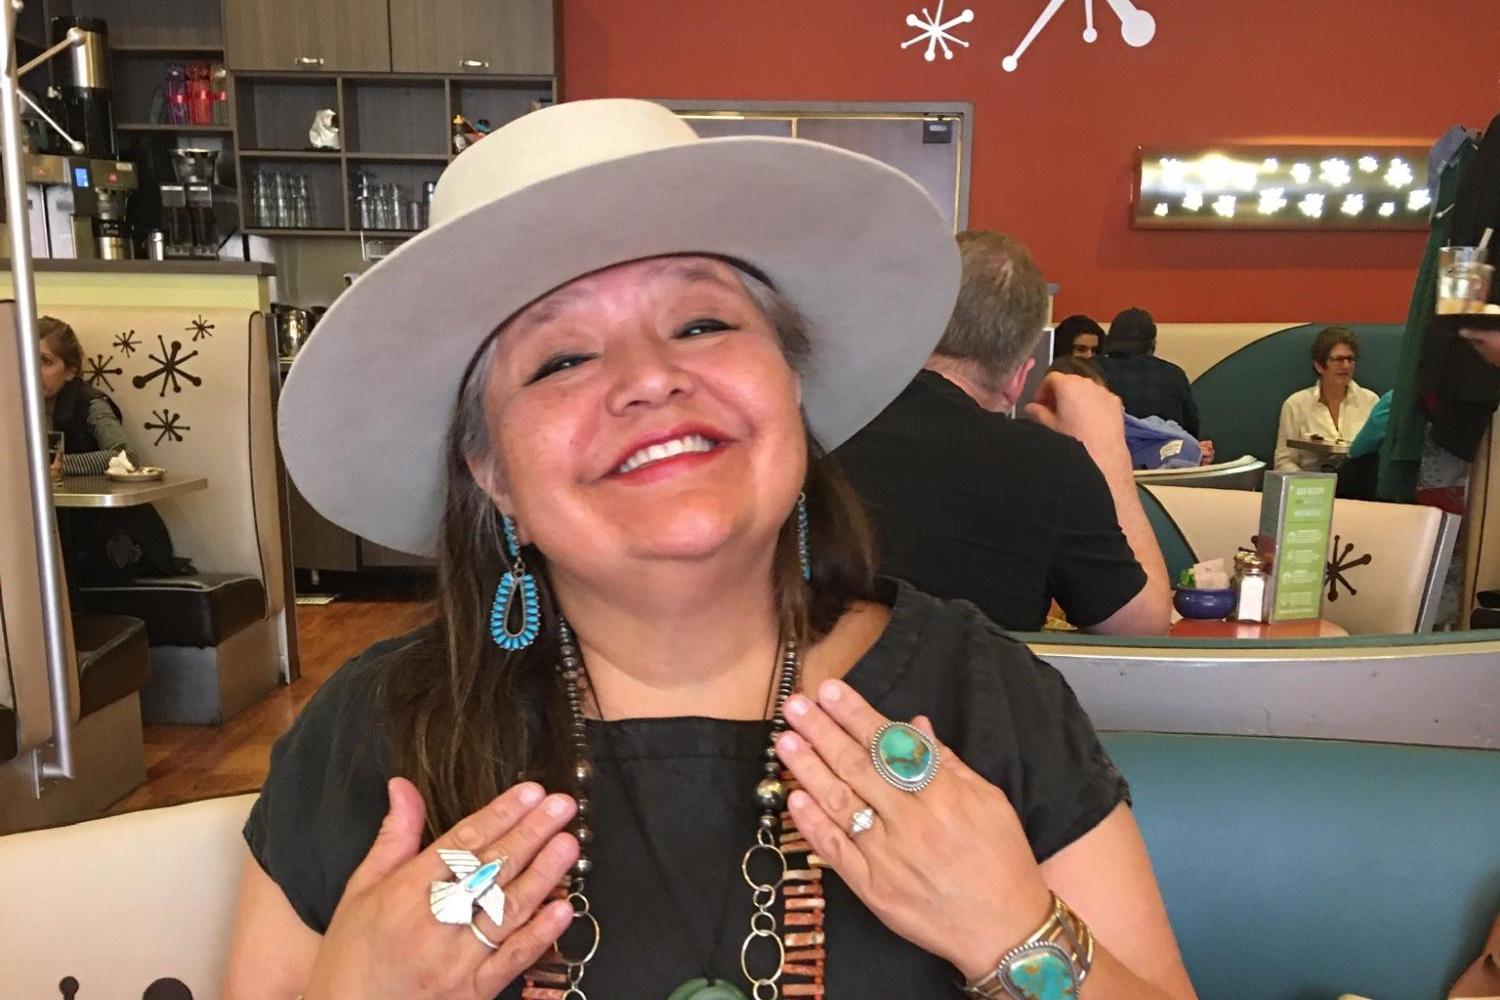 Melanie Yazzie, a Native American woman with dark hair with grey streaks. She is smiling and wearing colorful jewelry, including torquoise, and a white, brimmed hat.